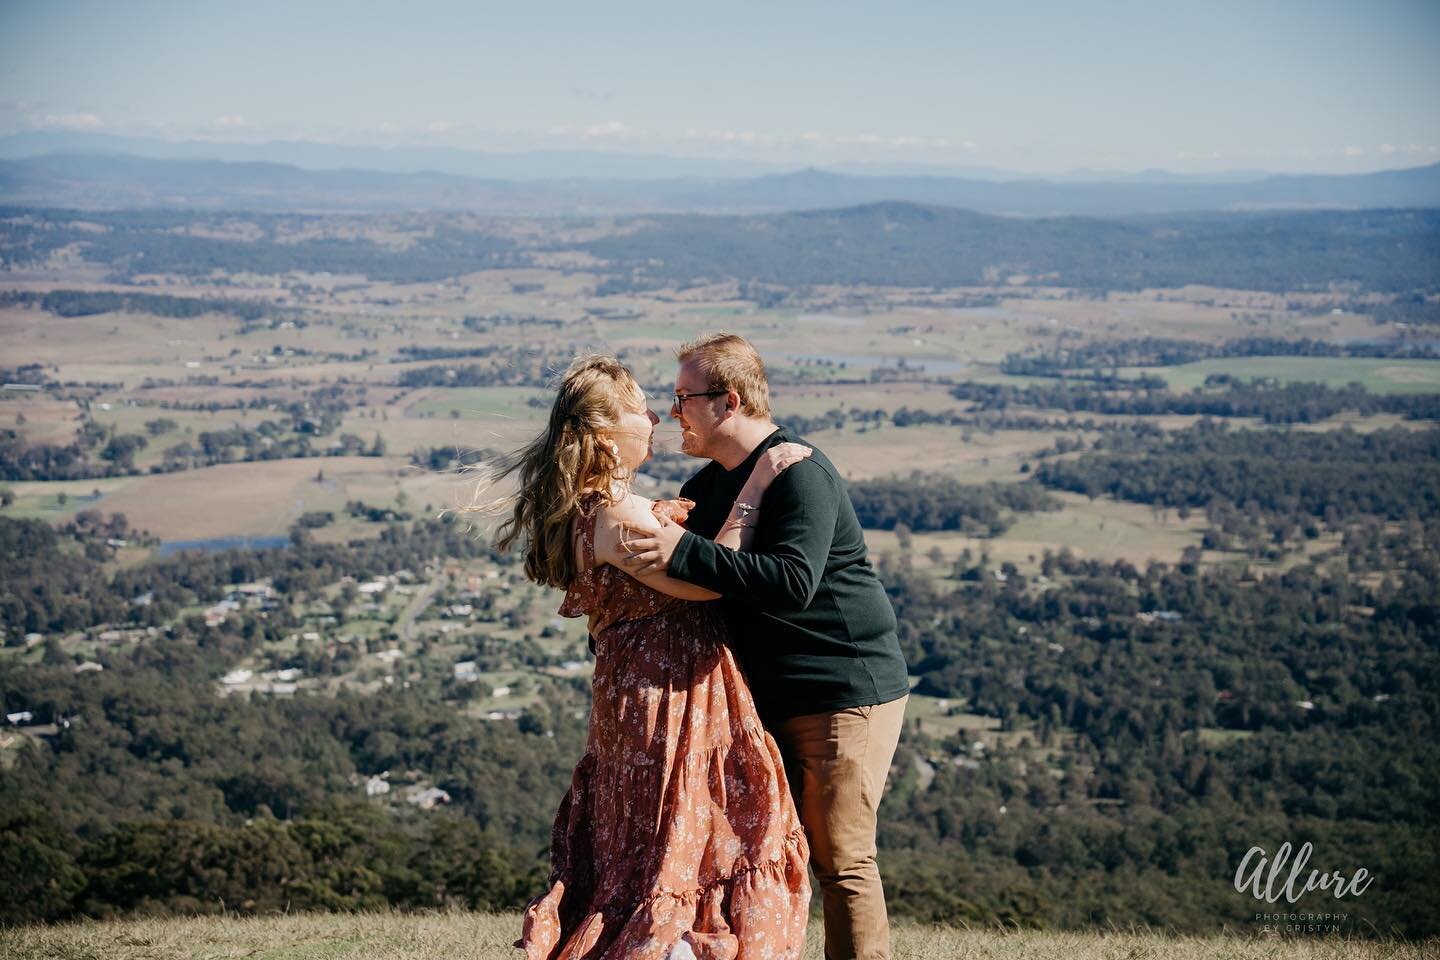 A sweet moment with Rebekah &amp; Corey on the top of Mt Tambourine for an engagement shoot🤍

The sweetest couple by far! It was such a windy/cold morning and they both handled it like the champs that they are!
.
.
.
.
.
.
 #photography #photoshoot 